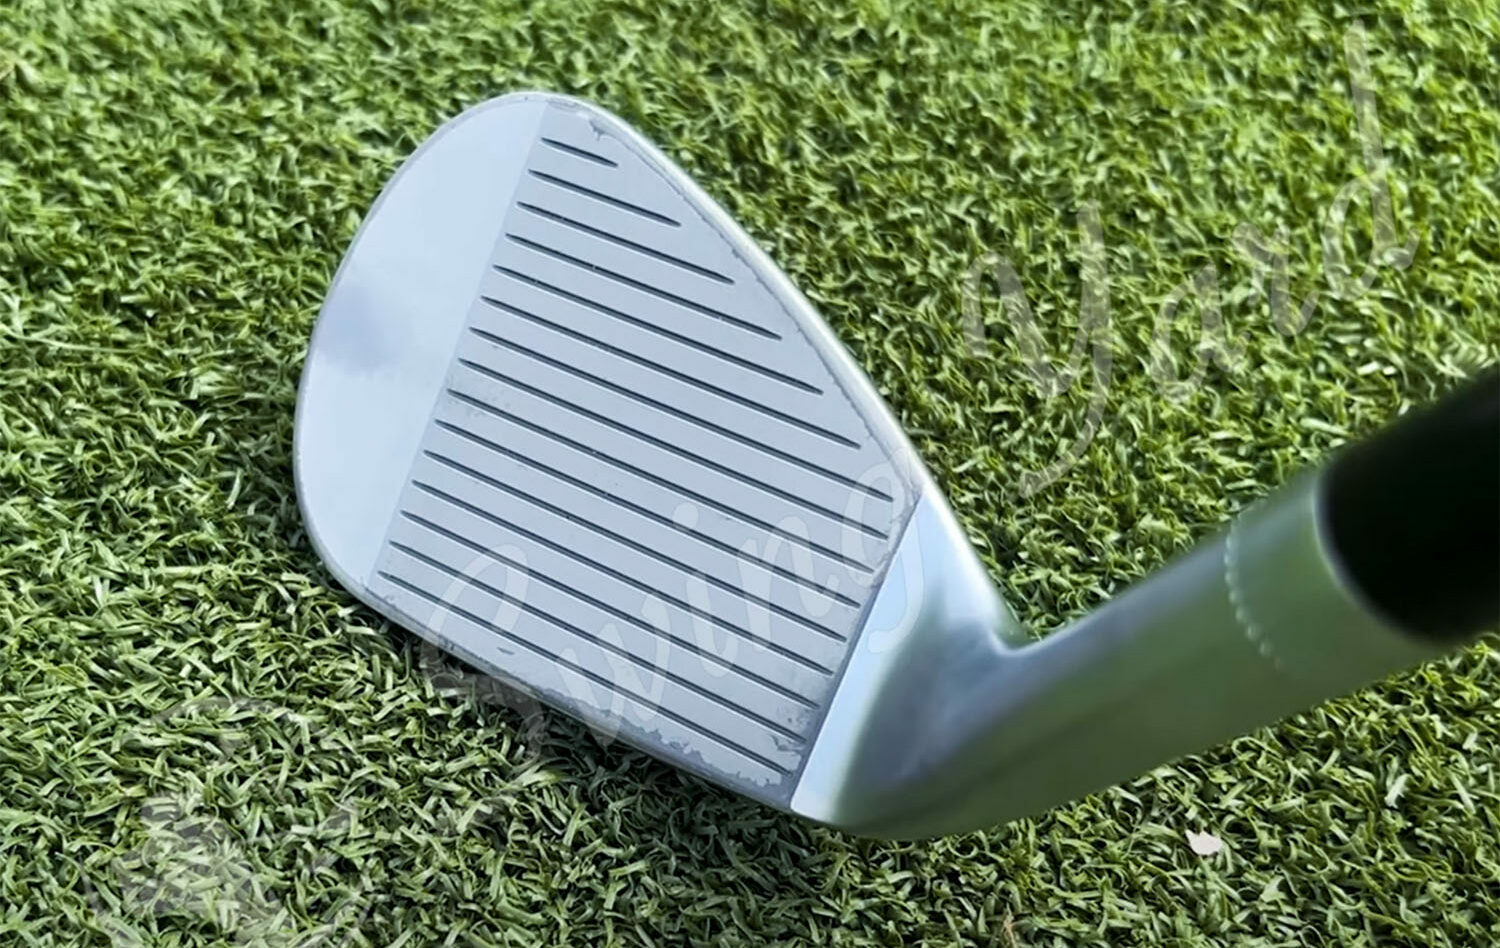 The Callaway Mack Daddy Jaws 5 Wedge at the golf course